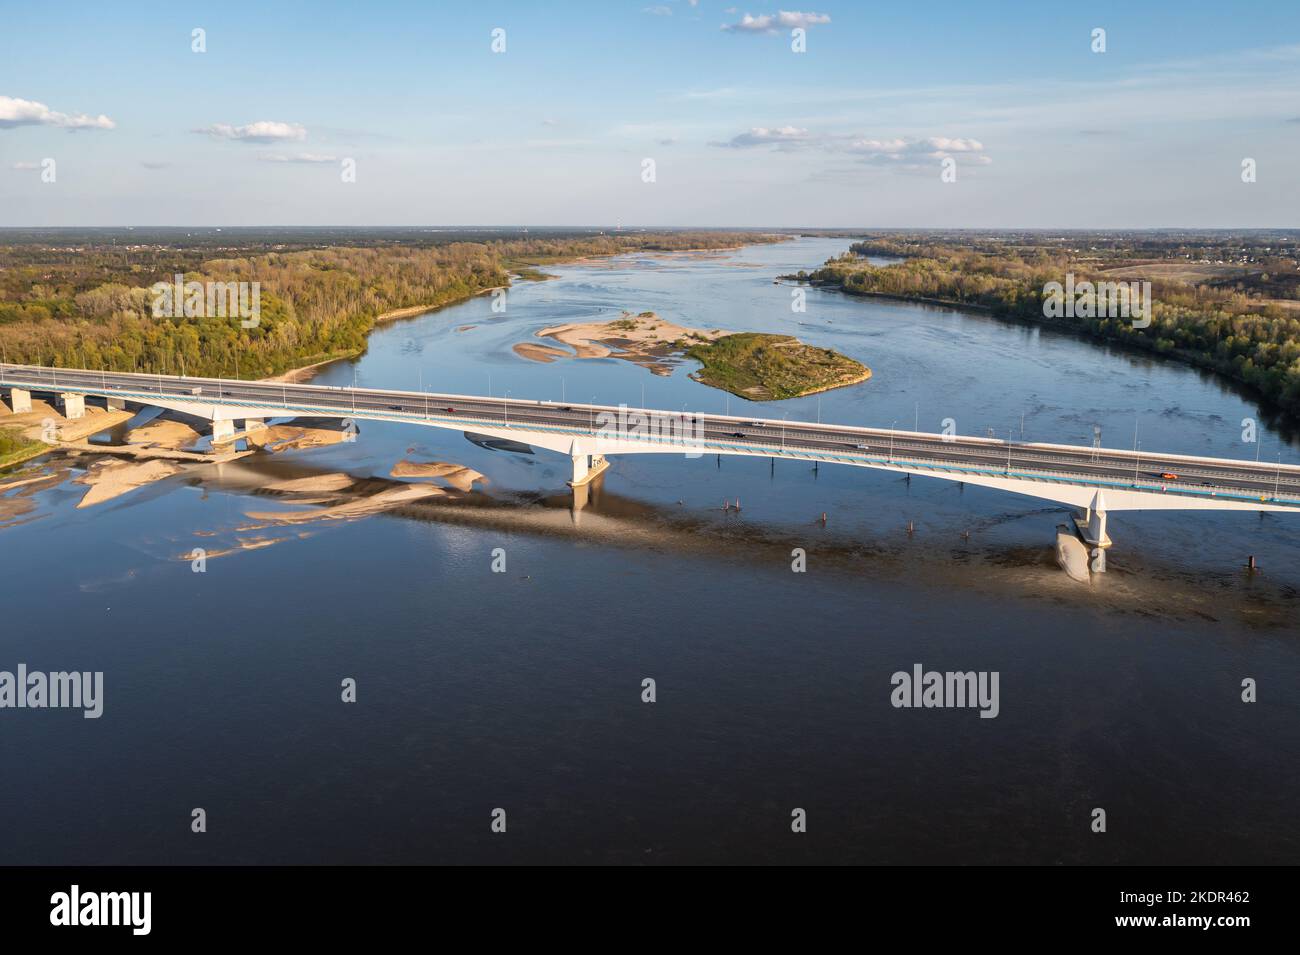 Aerial view of Anna Jagiellon Bridge also called South Bridge, part of S2 expressway over Vistula River in Warsaw, capital of Poland Stock Photo